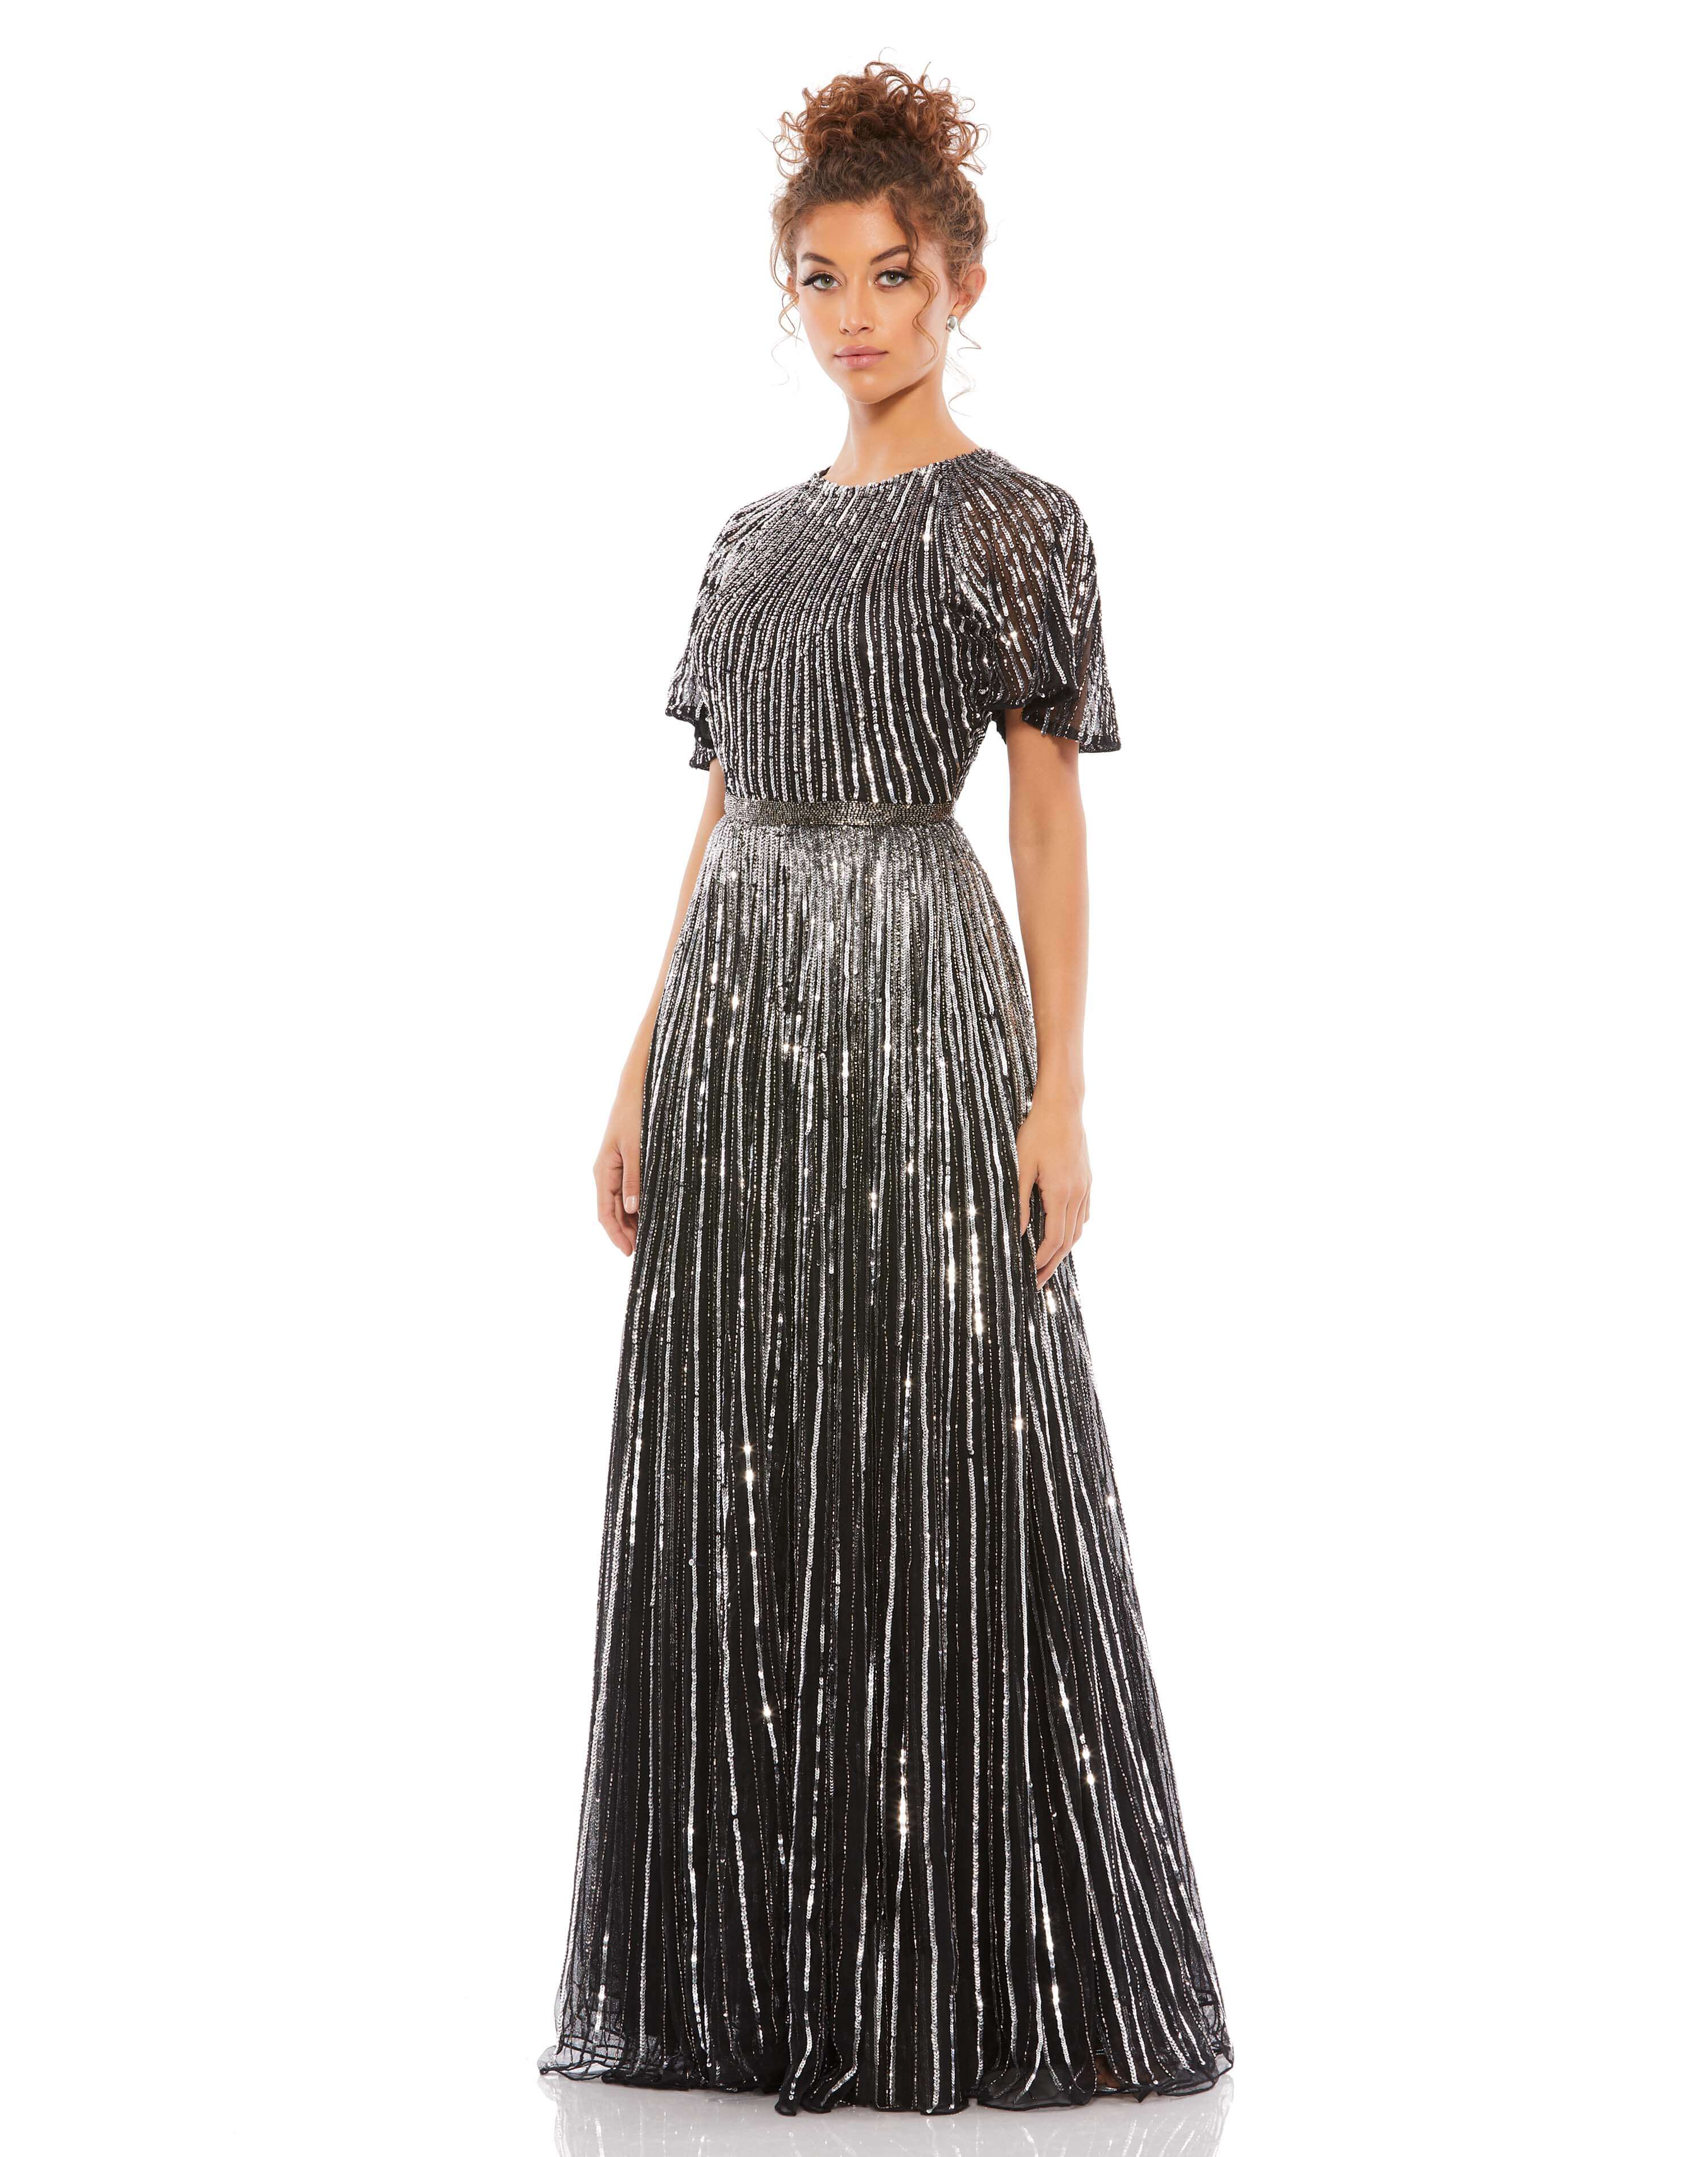 Short Sleeve Ombre Sequined Evening Gown